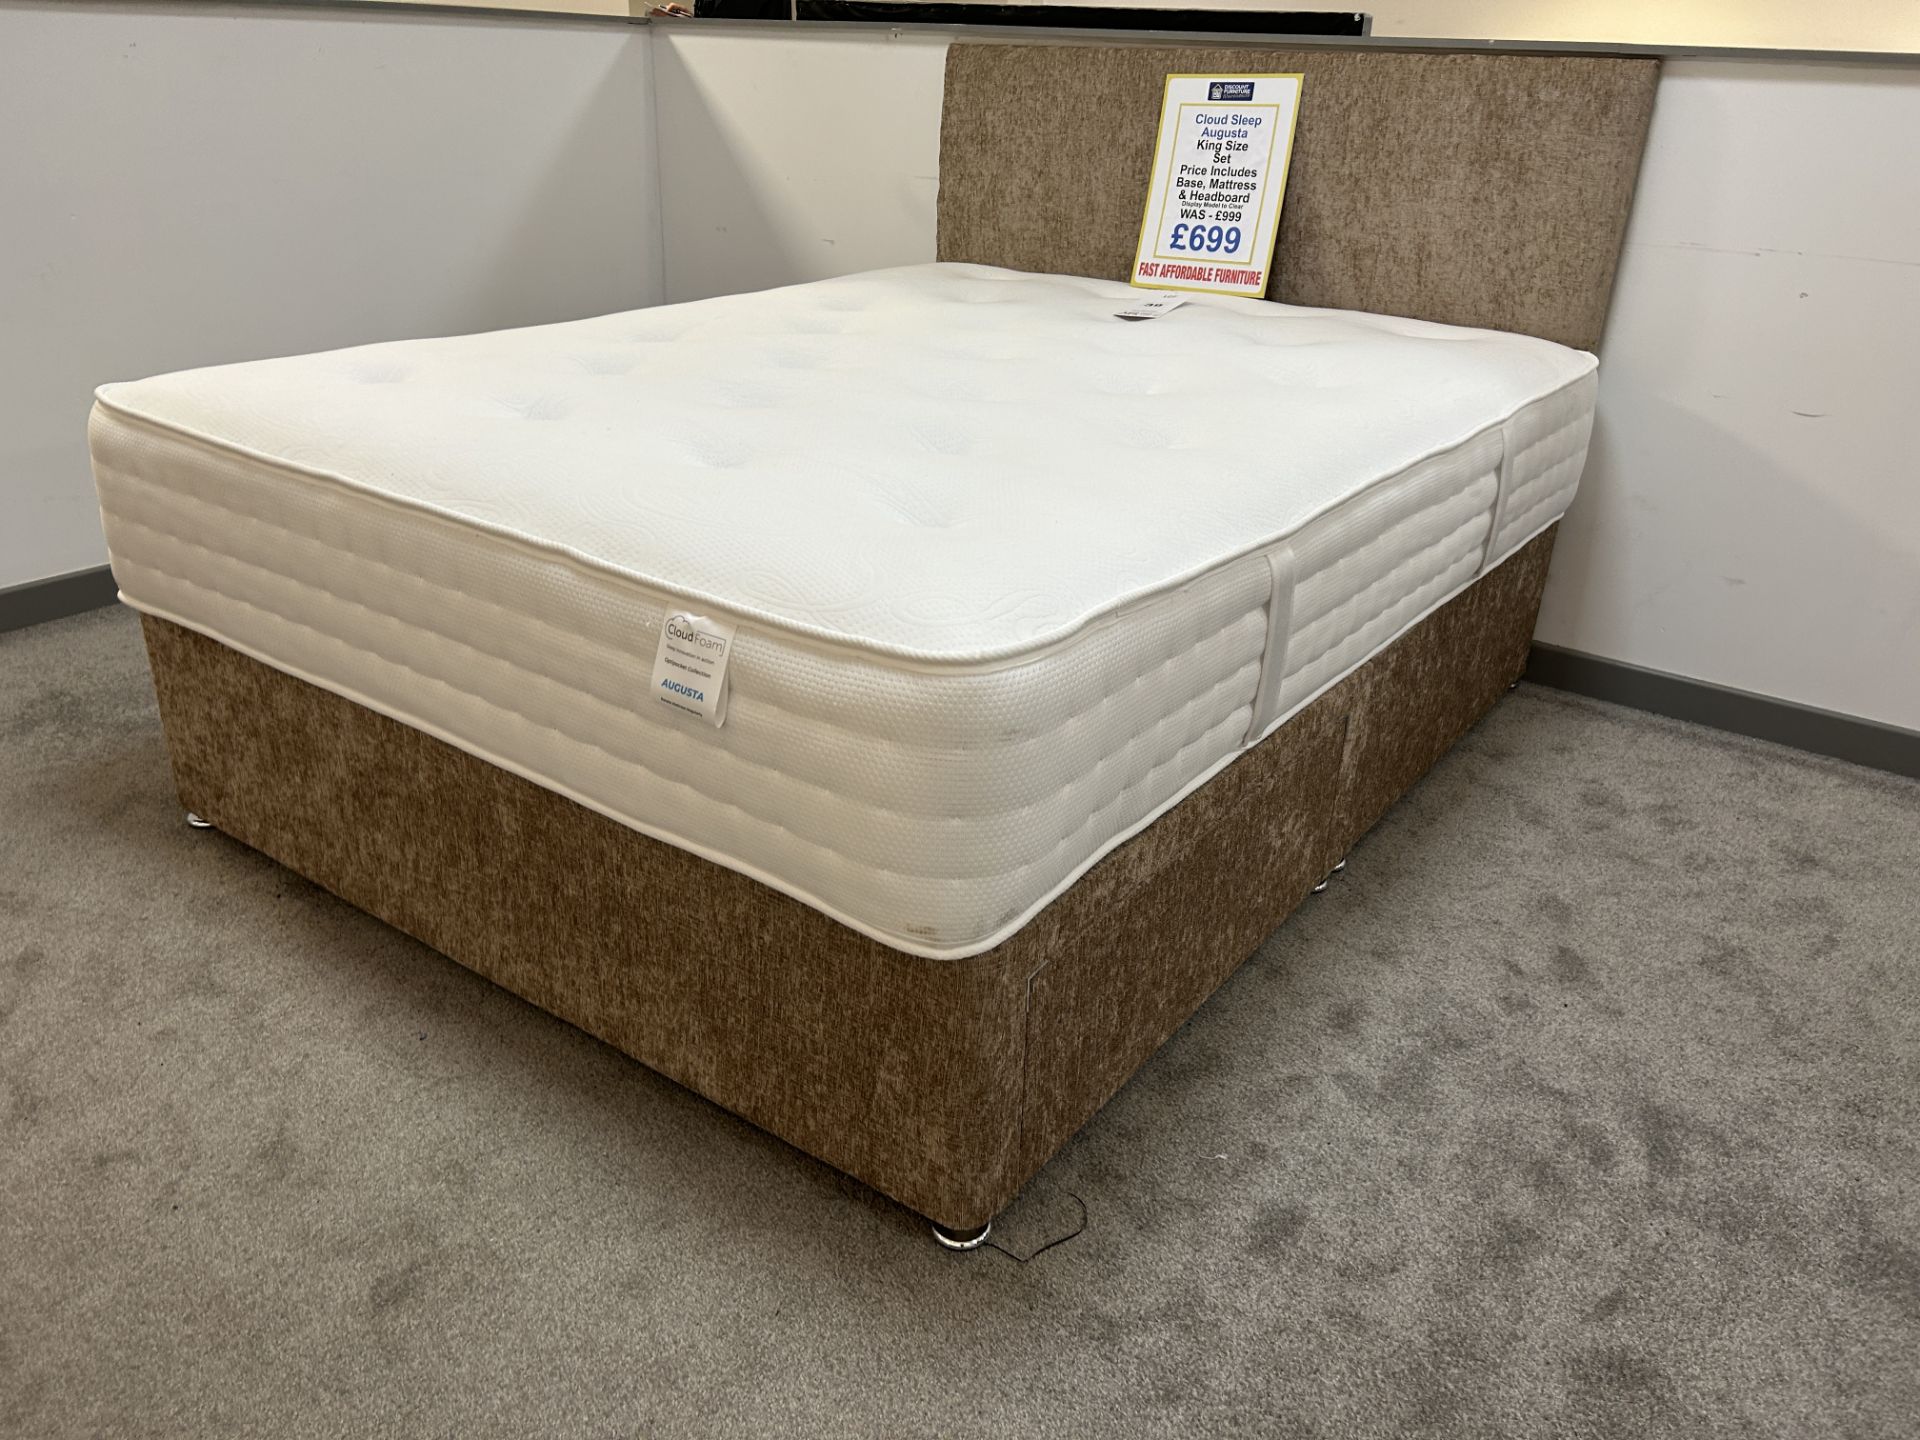 Ex-Display King Size Bed Set incl: Cloudfoam Augusta Mattress, Base & Headboard | RRP £999 - Image 2 of 4